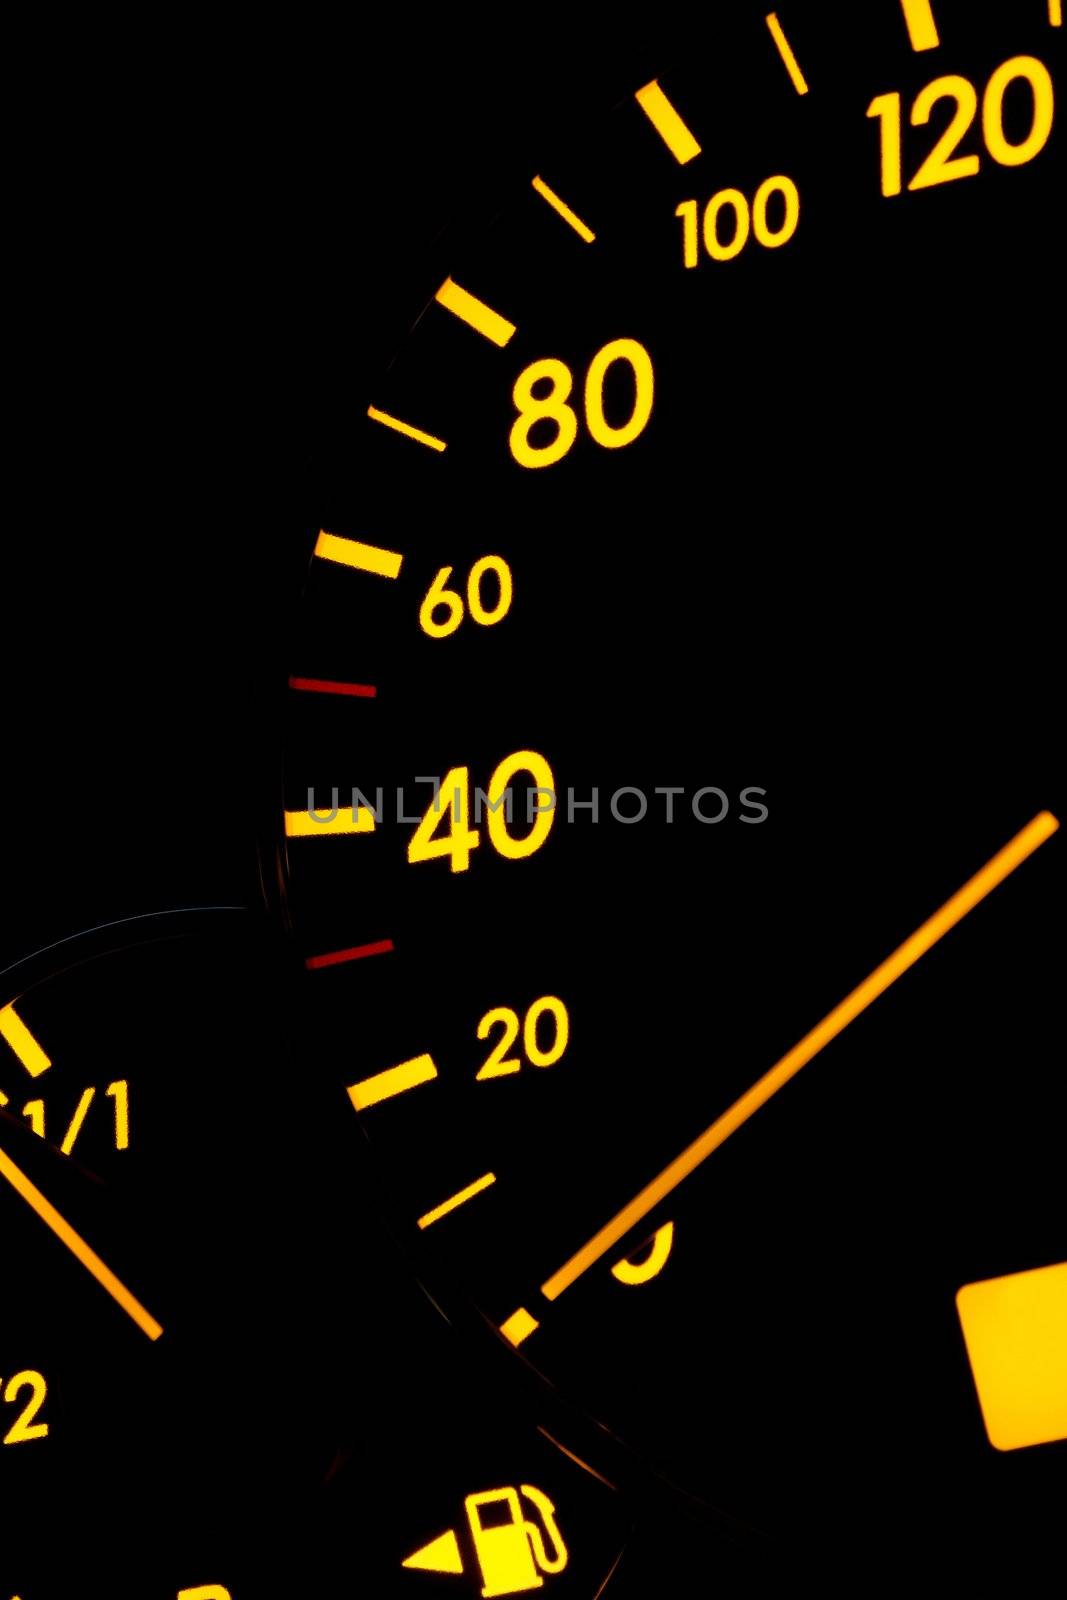 Speedometer of a car glowing against black background